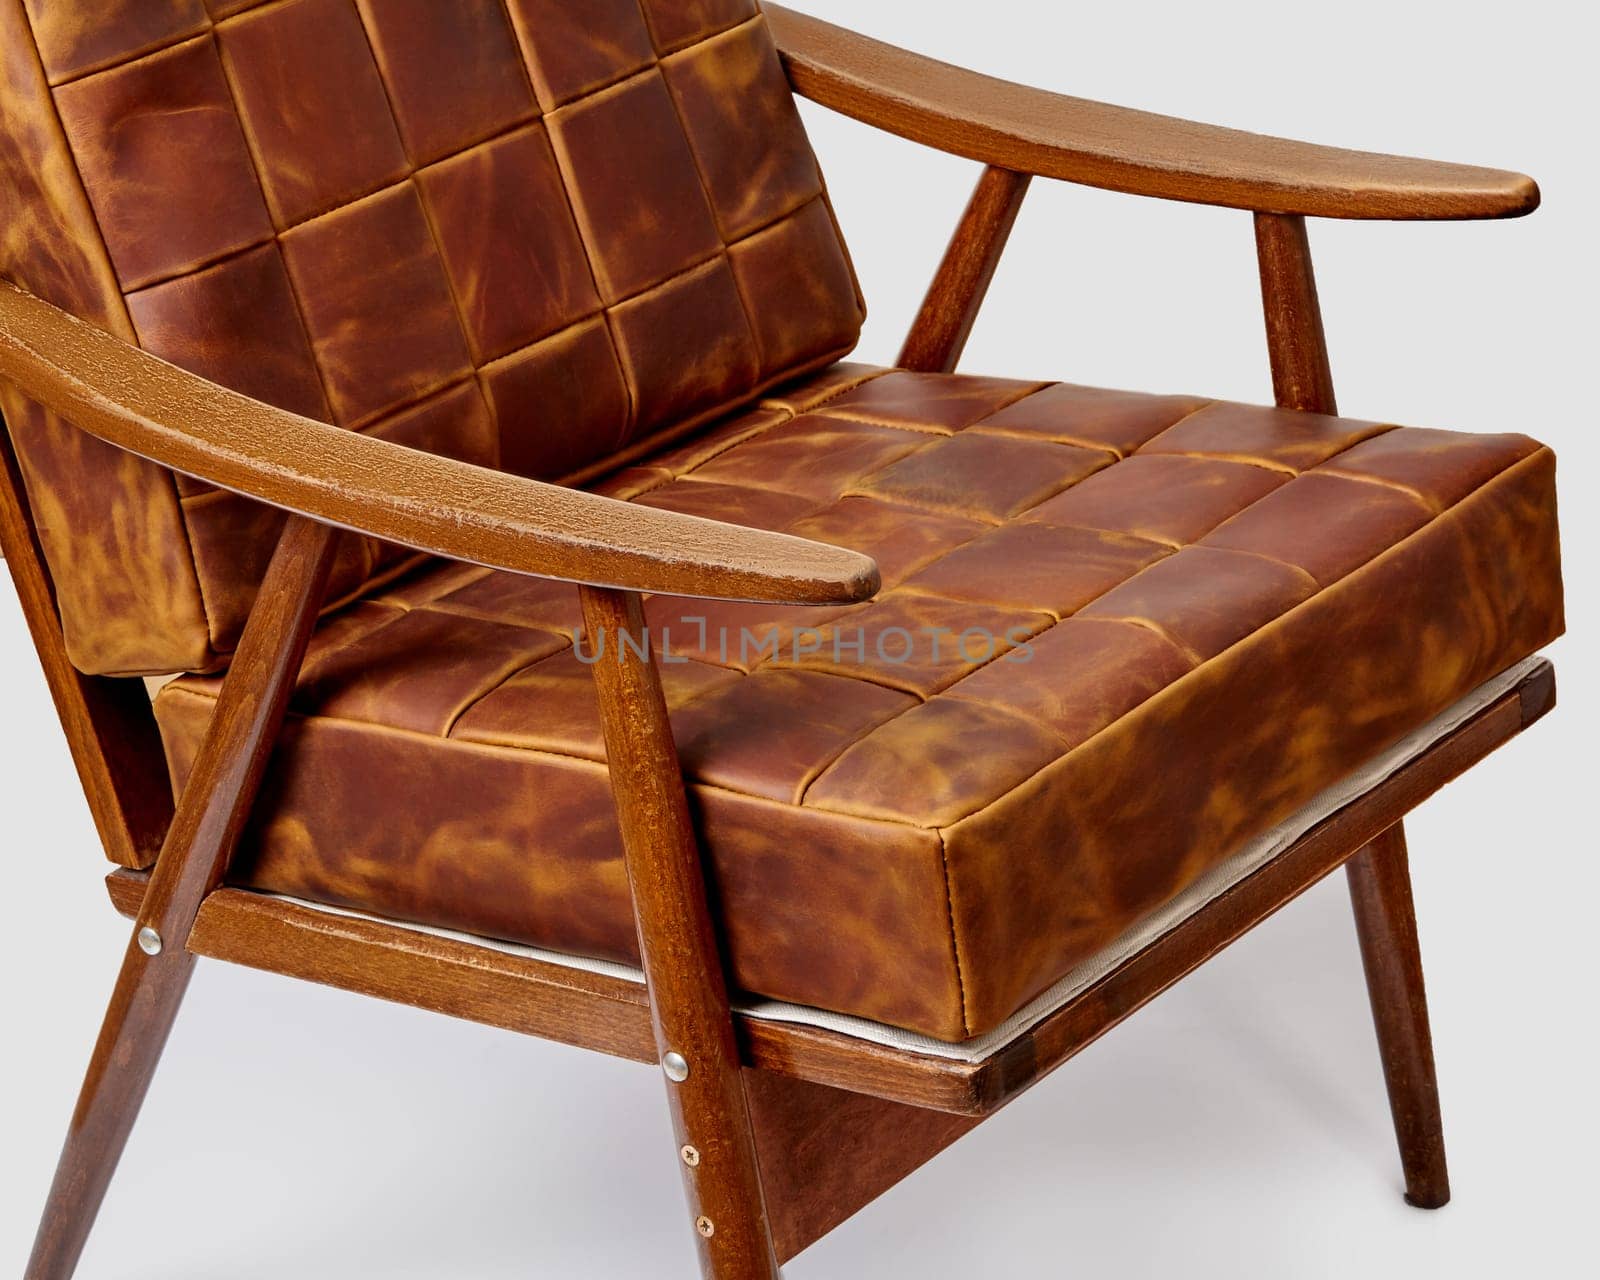 Patchwork brown leather cushions complementing vintage wooden chair by nazarovsergey